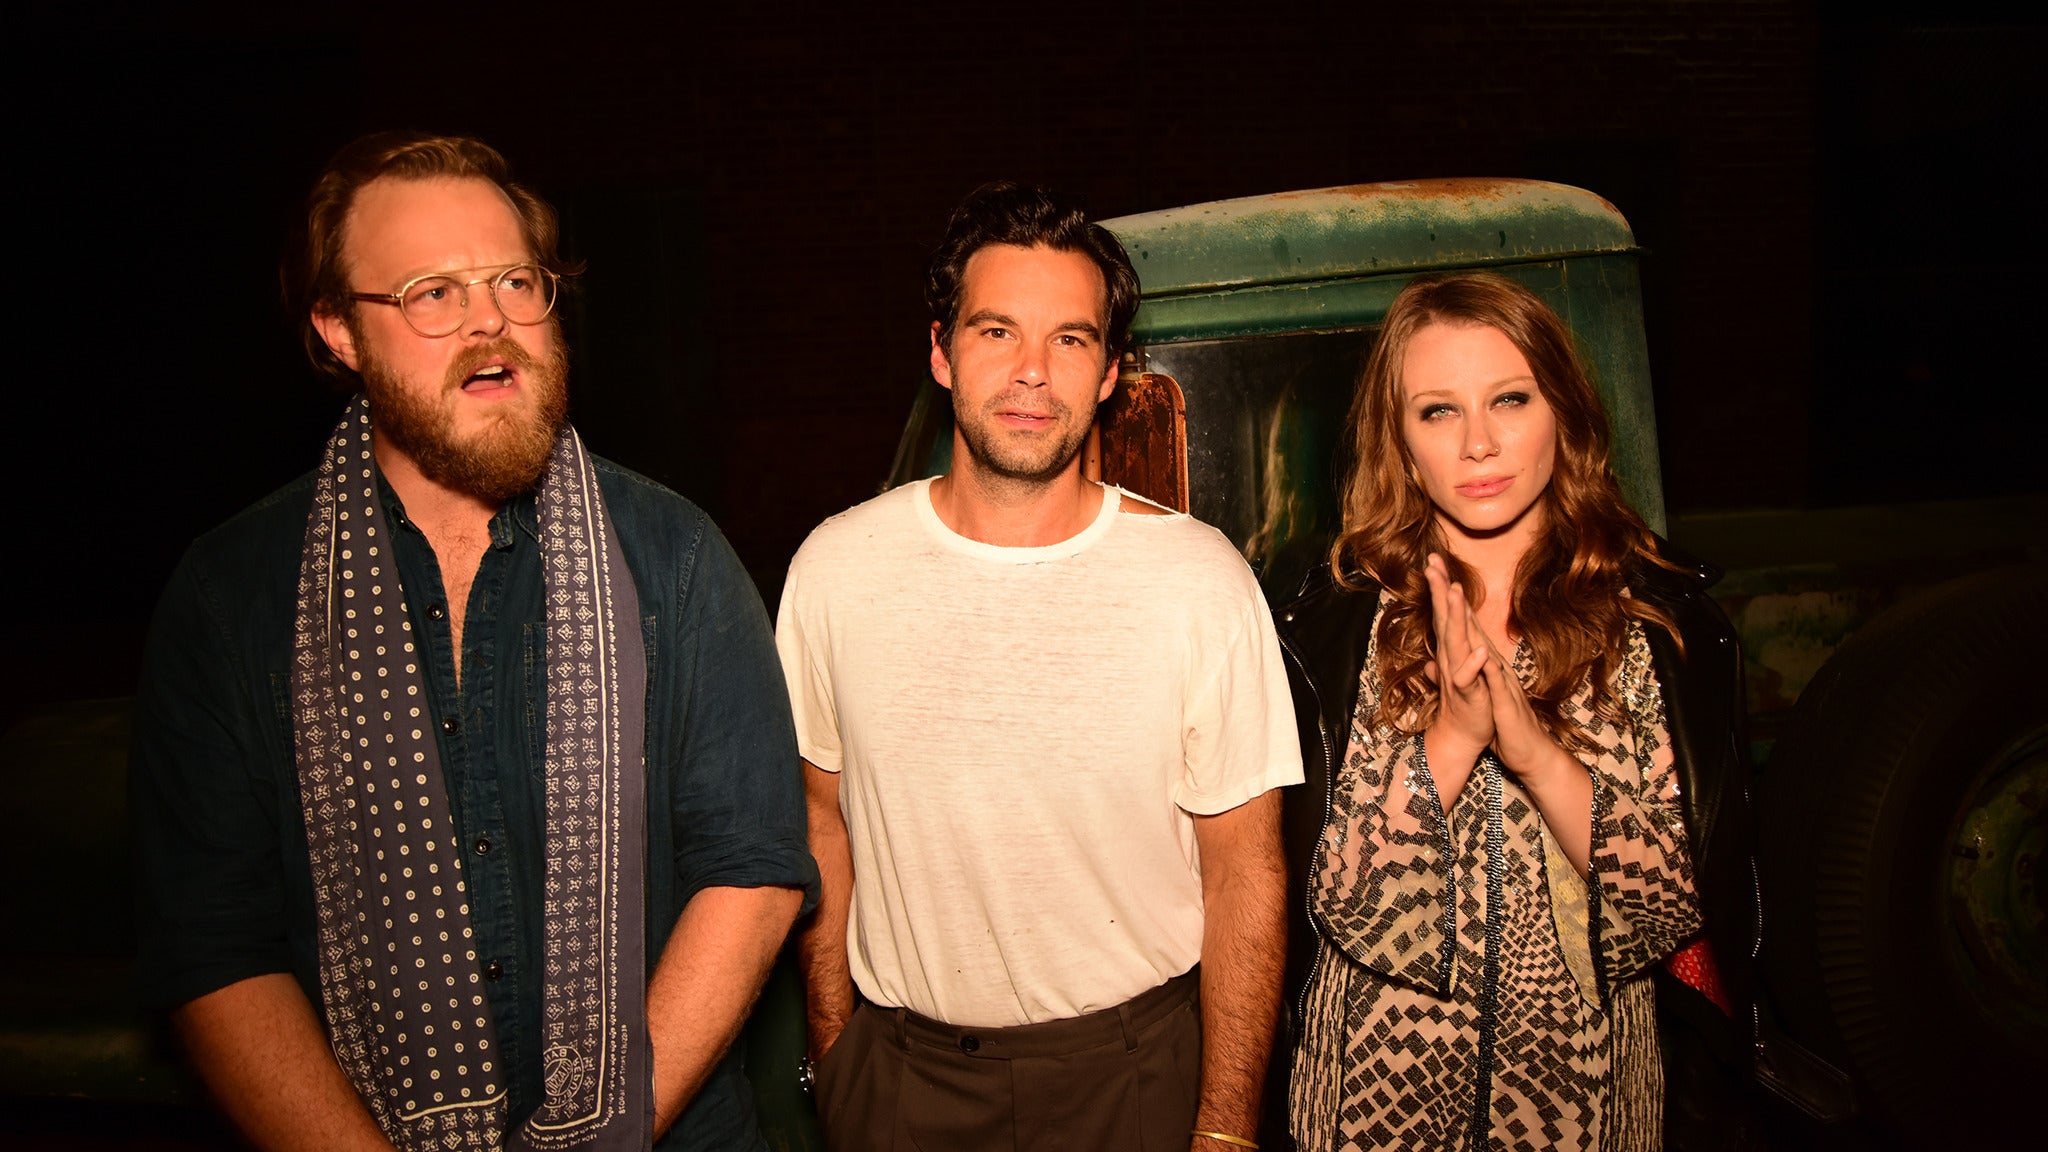 The Lone Bellow: Half Moon Light Tour in Boston promo photo for Artist presale offer code